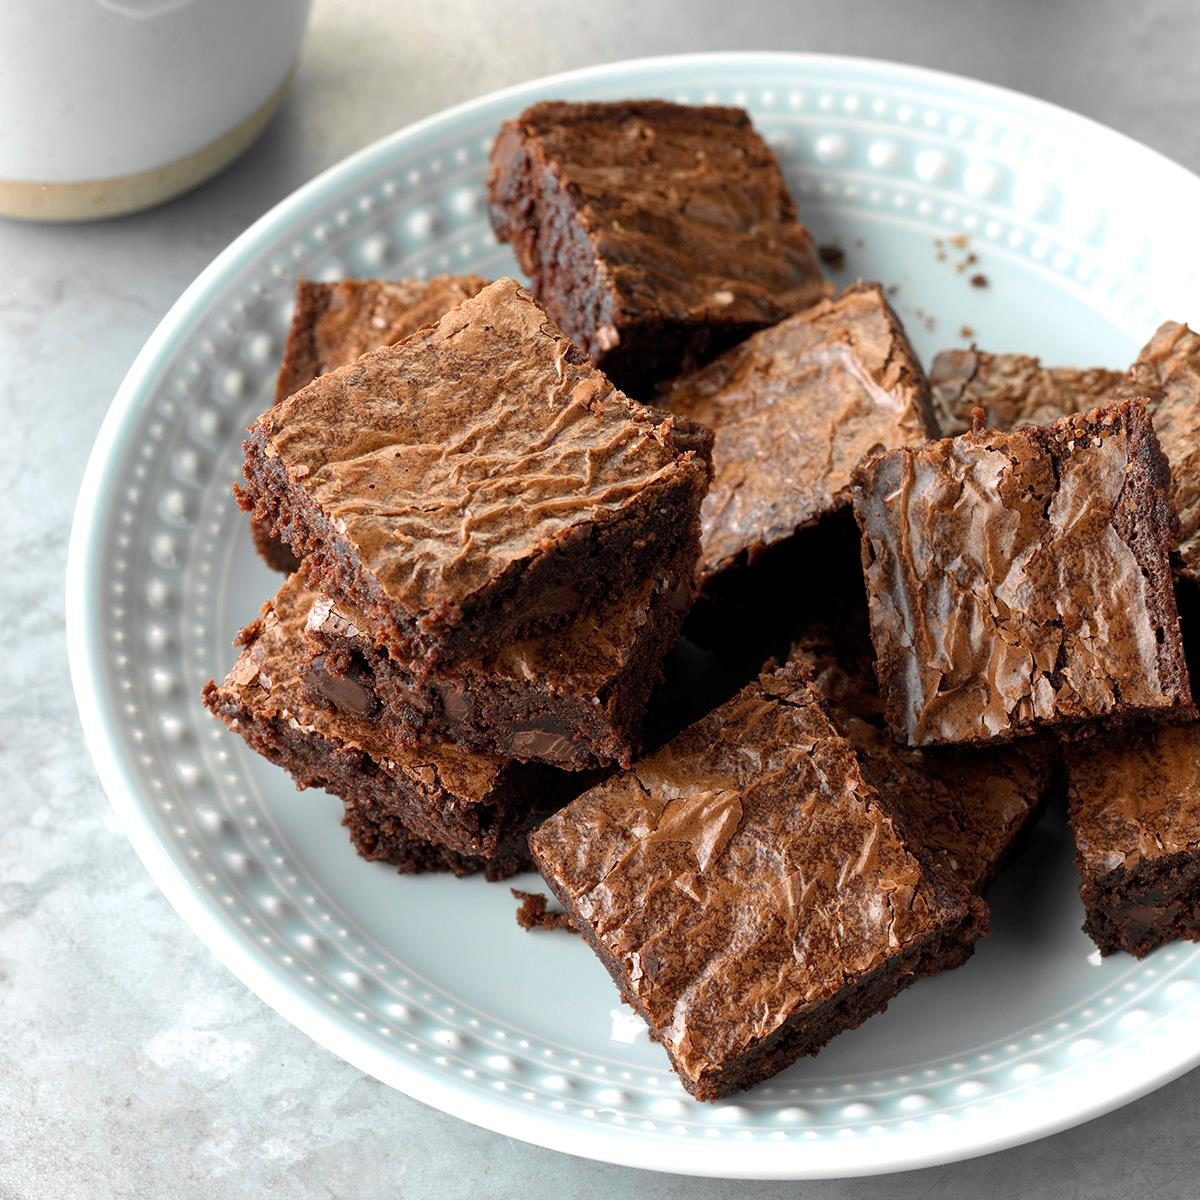 https://www.tasteofhome.com/wp-content/uploads/2018/01/Easy-Mexican-Brownies_EXPS_THCA18_193393_C01_05_3b-14.jpg?fit=700%2C1024